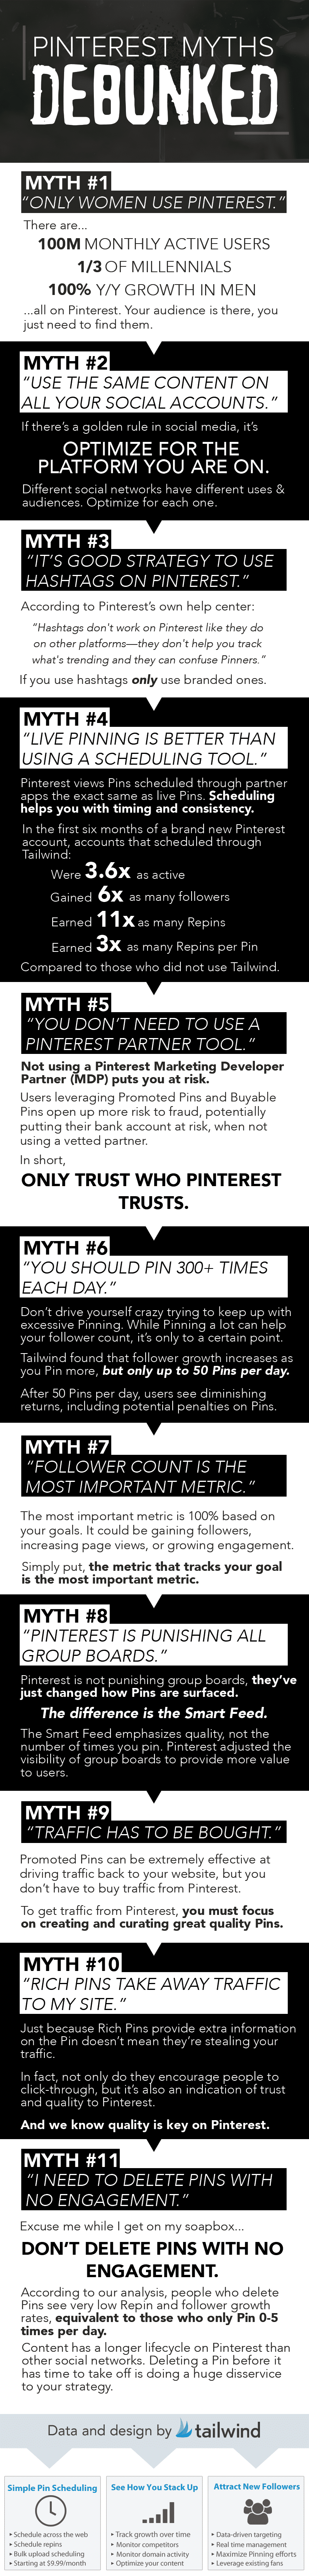 11 Persistent Pinterest Myths Debunked [Infographic]